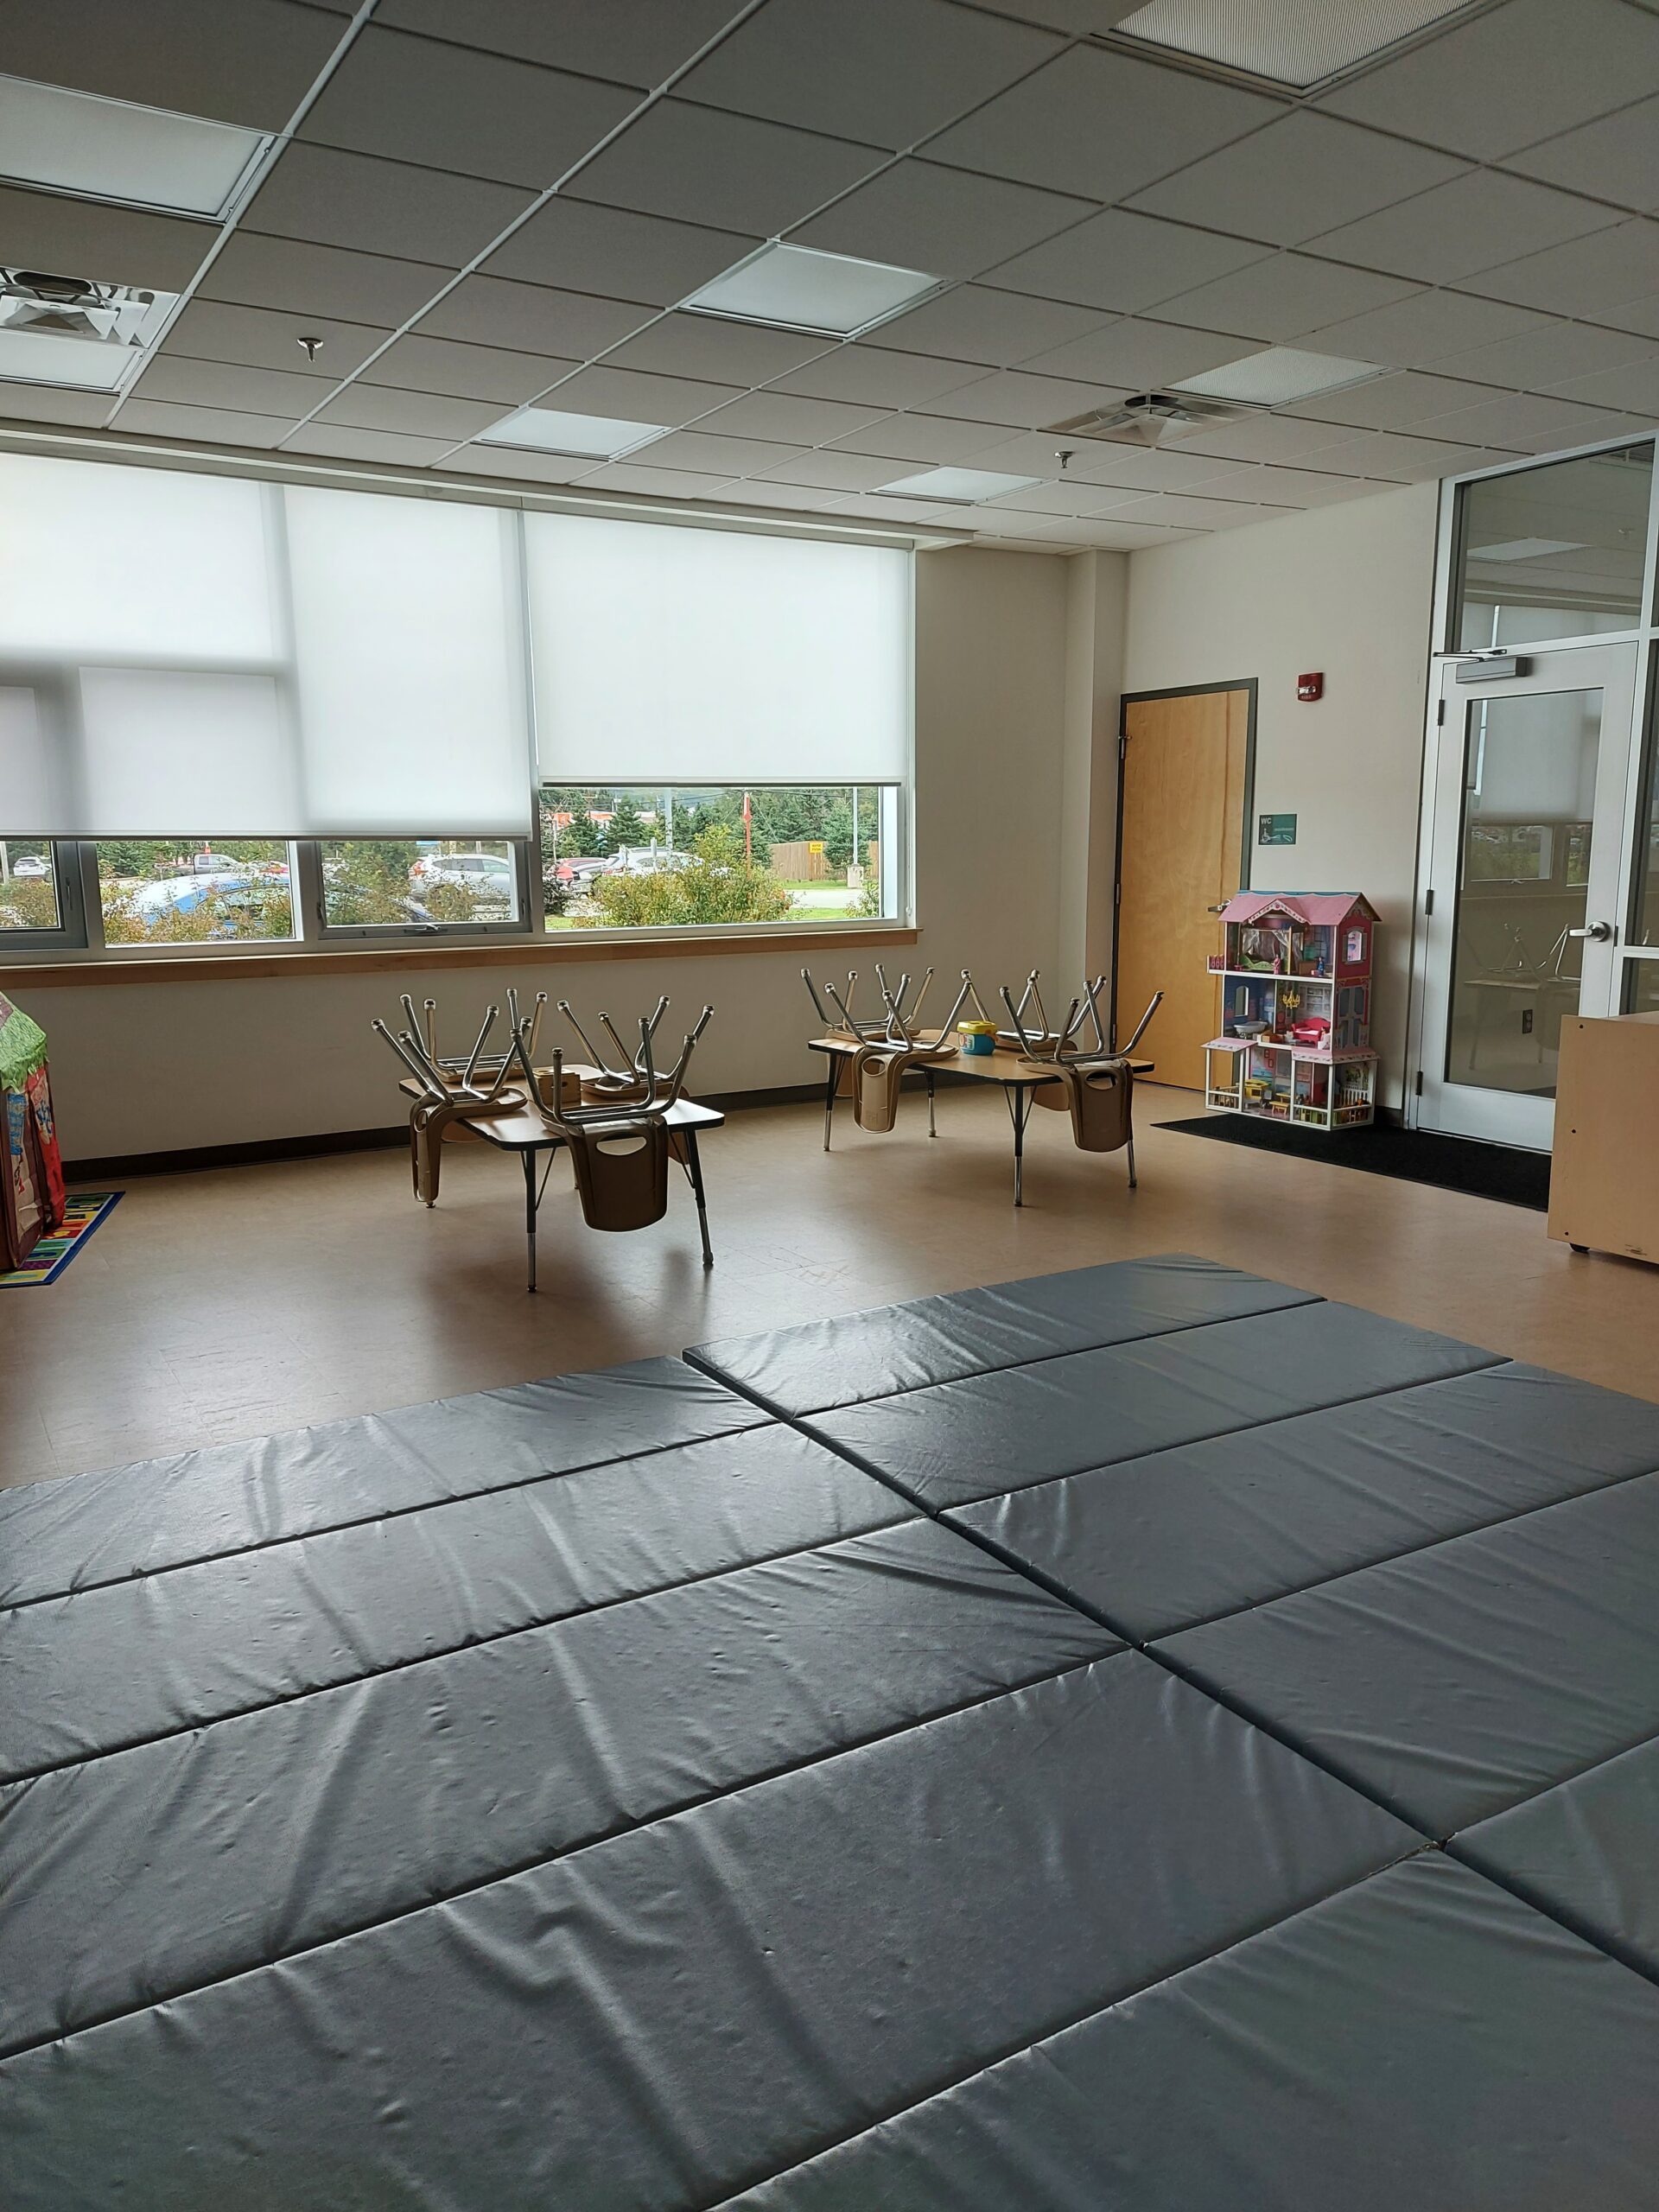 a rental room with mats on the floor, as well as children's tables and chairs, and toys